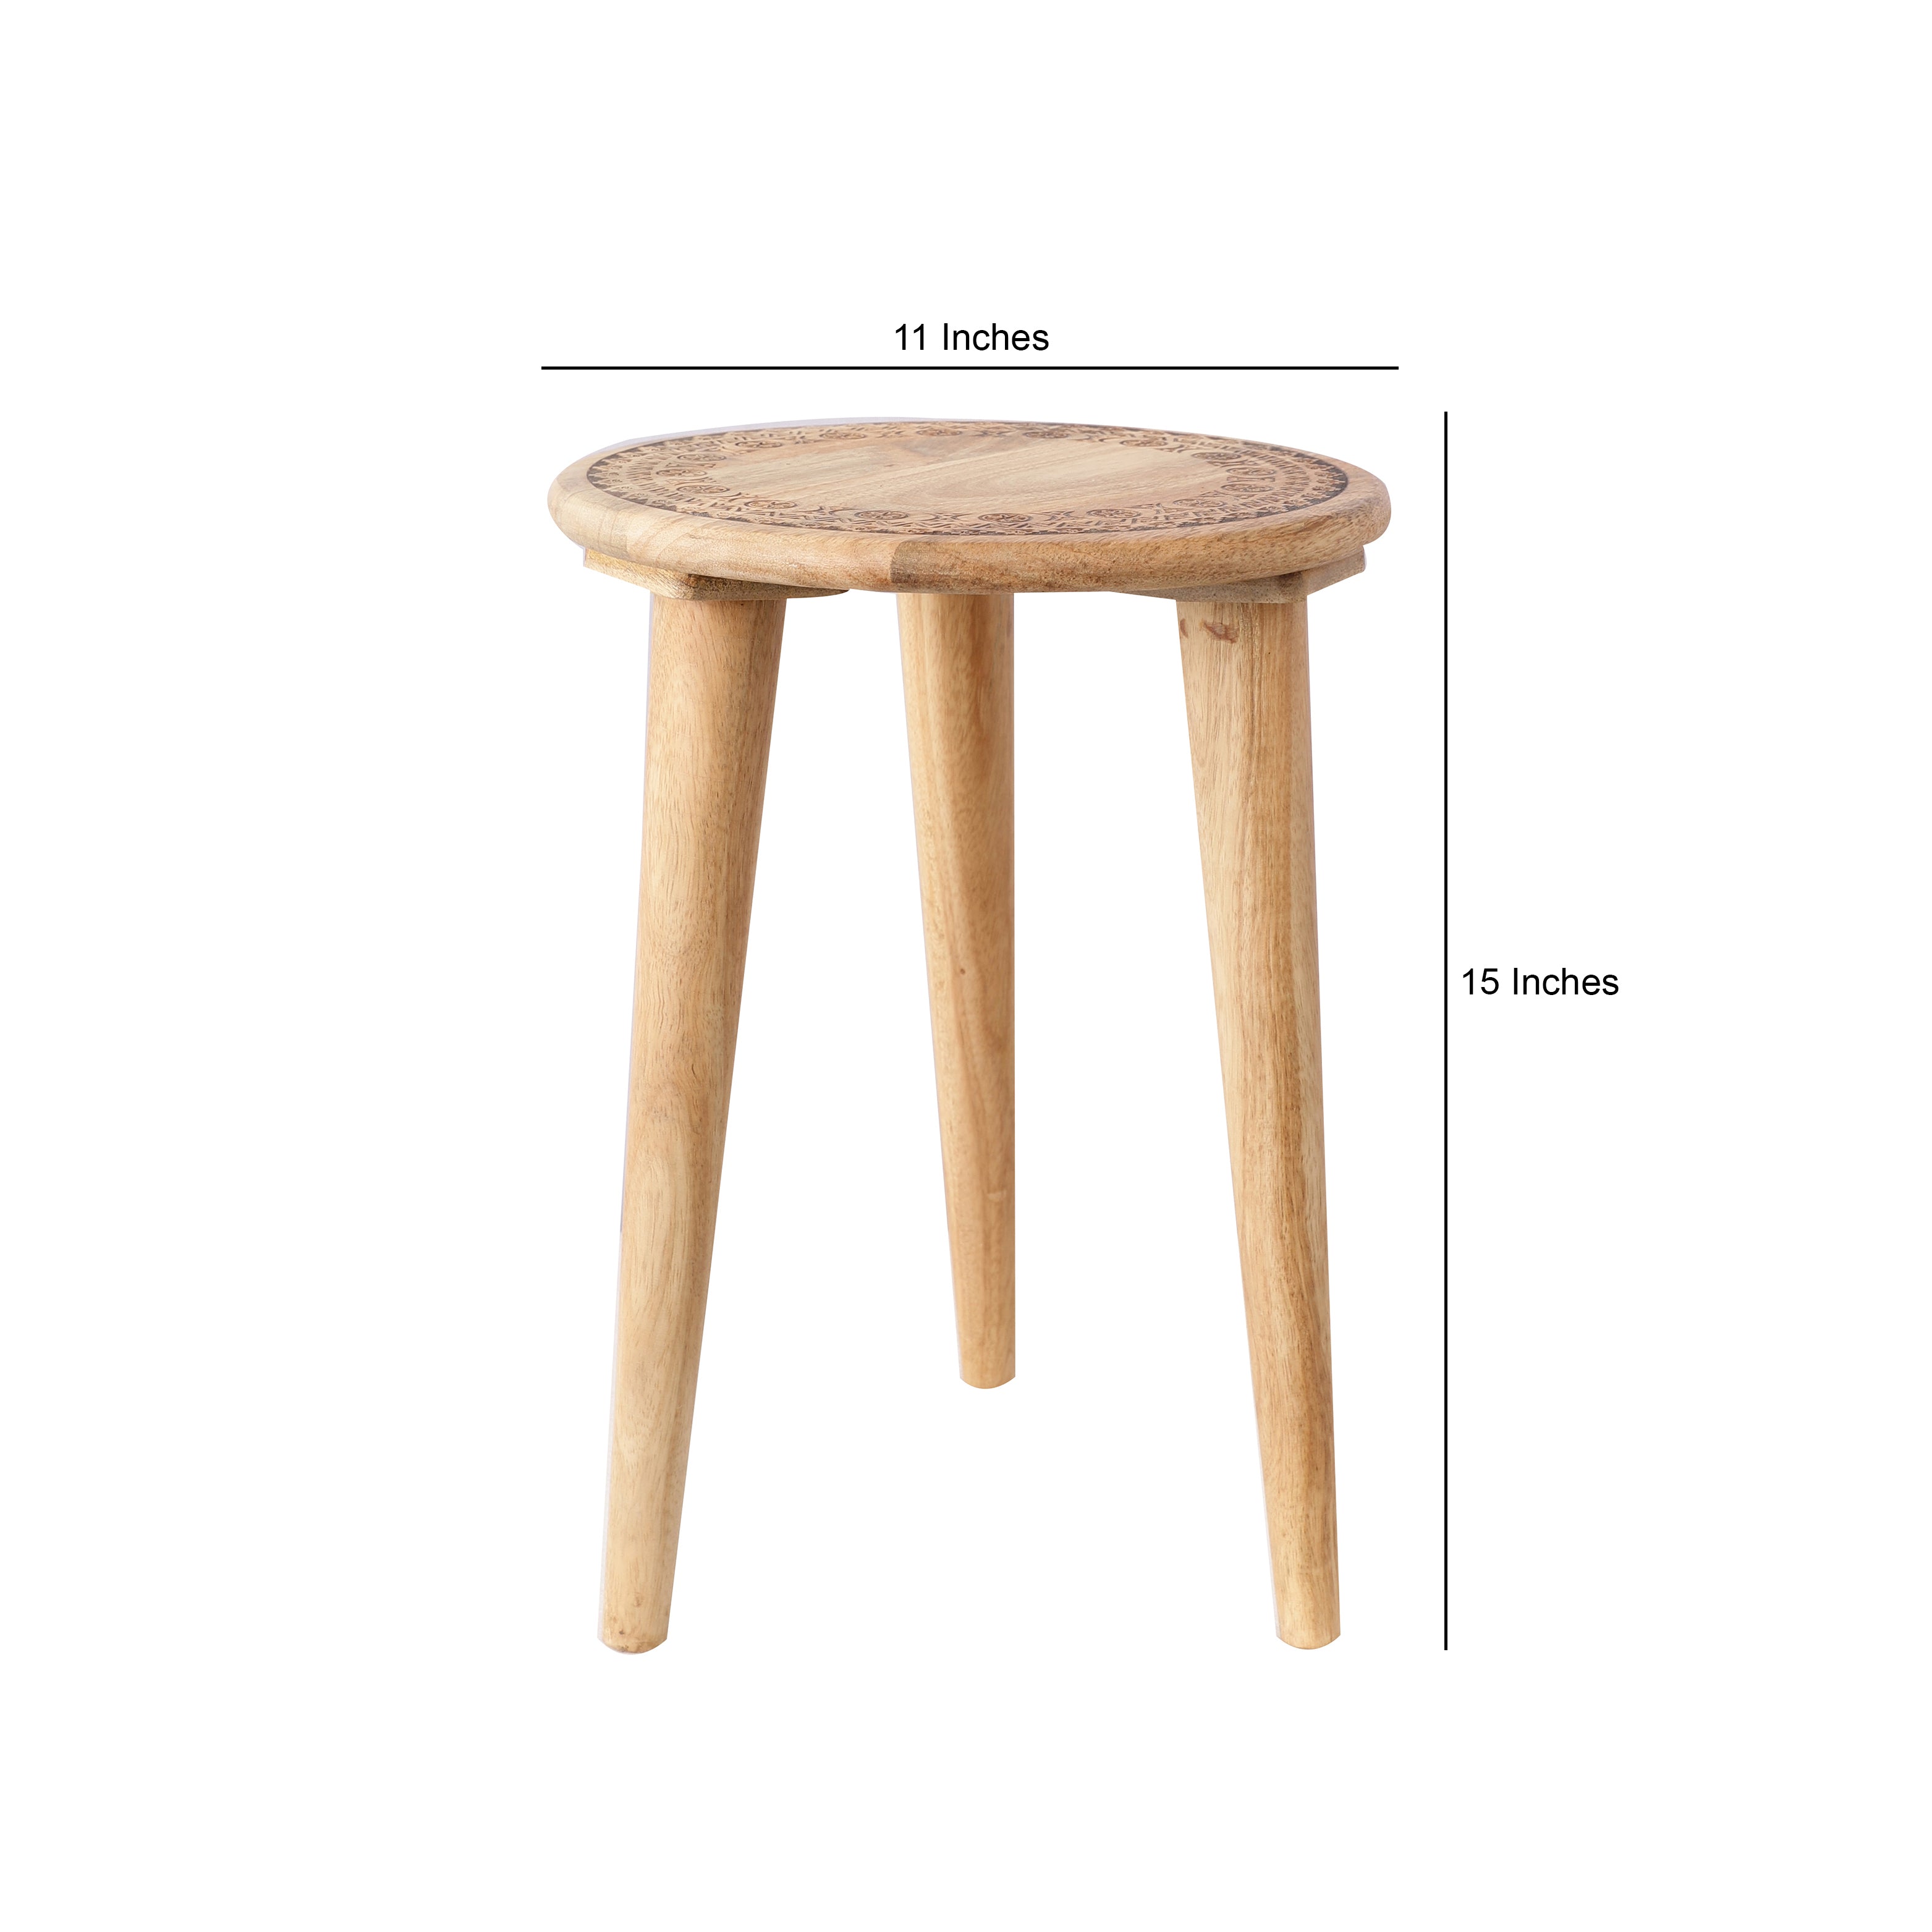 Round Wooden Table/Stool